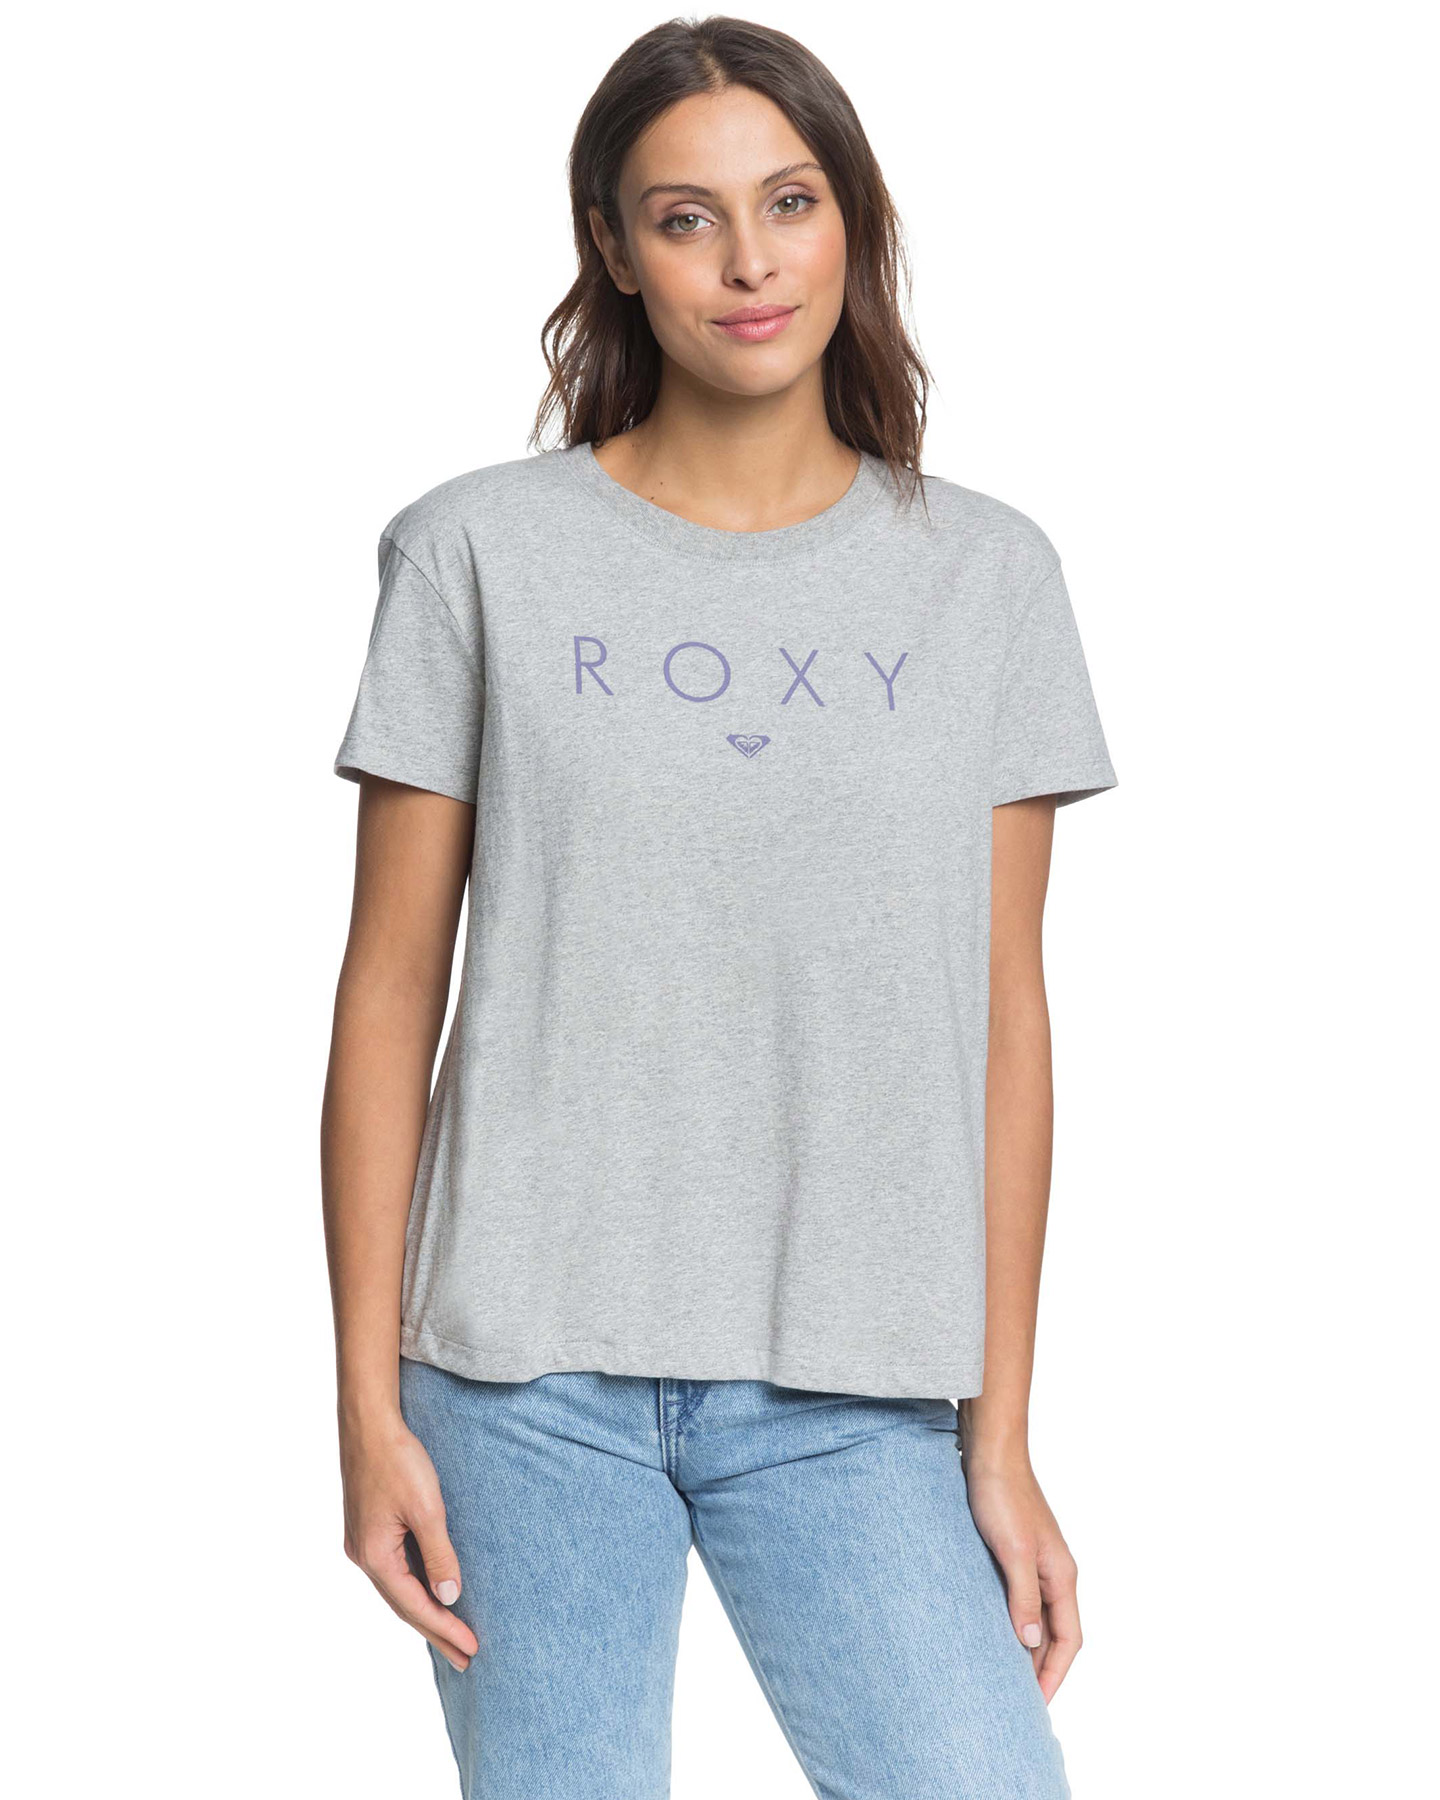 Roxy Womens Perfect Surfer Girl Tee - Heritage Heather | SurfStitch